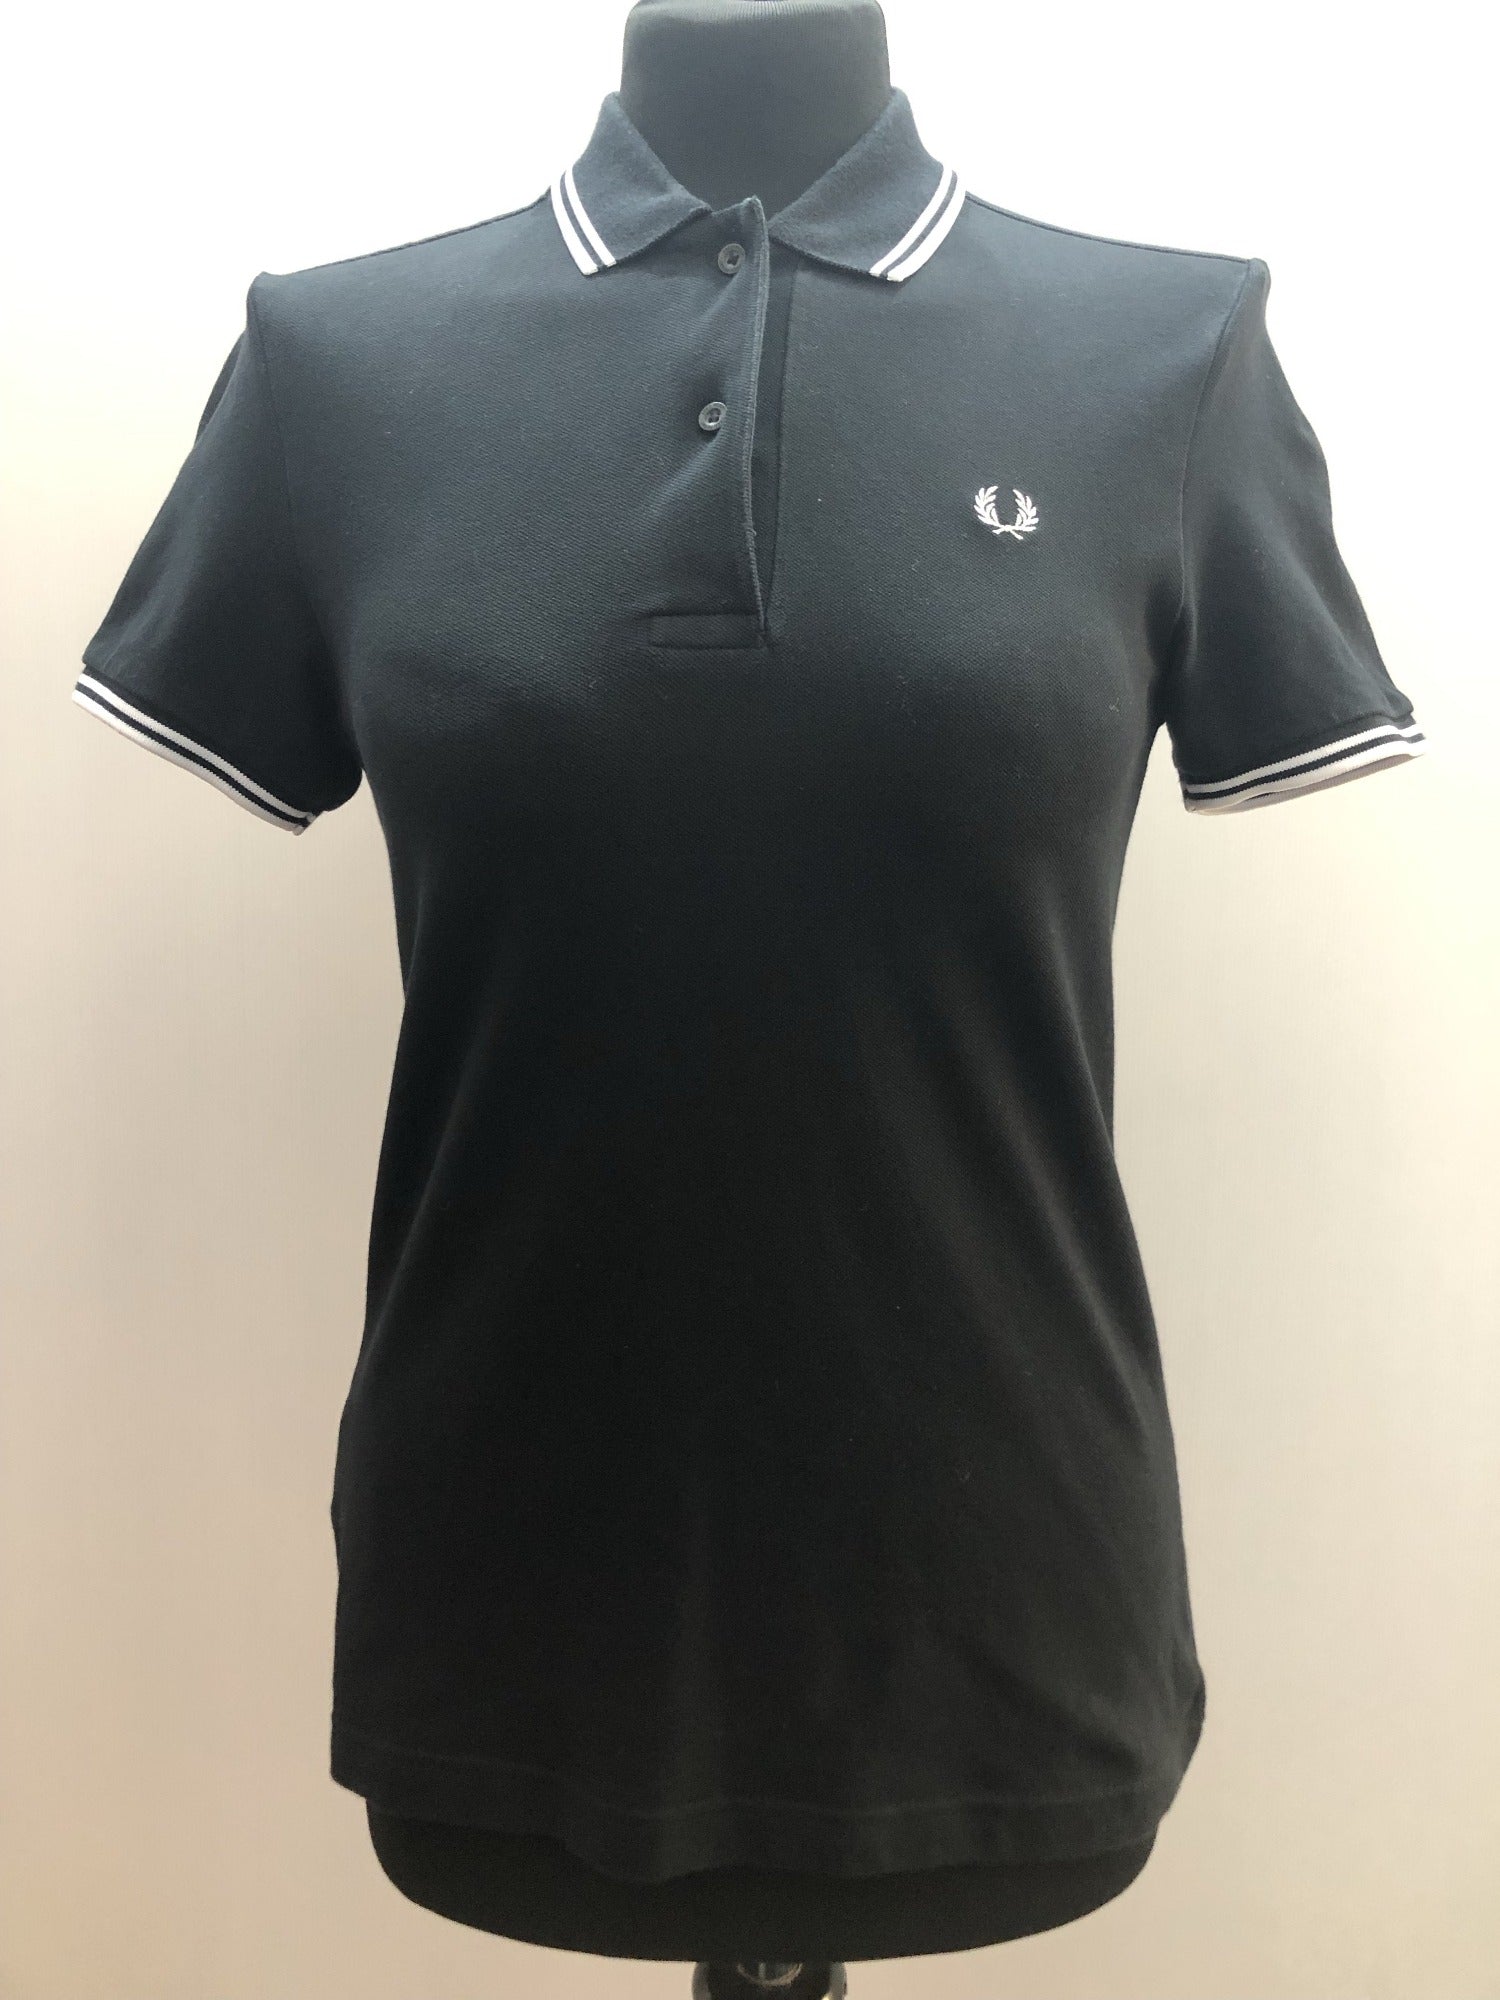 womens  Urban Village Vintage  T-Shirt  striped  polo top  polo  MOD  Fred Perry  embroidered logo  black  8